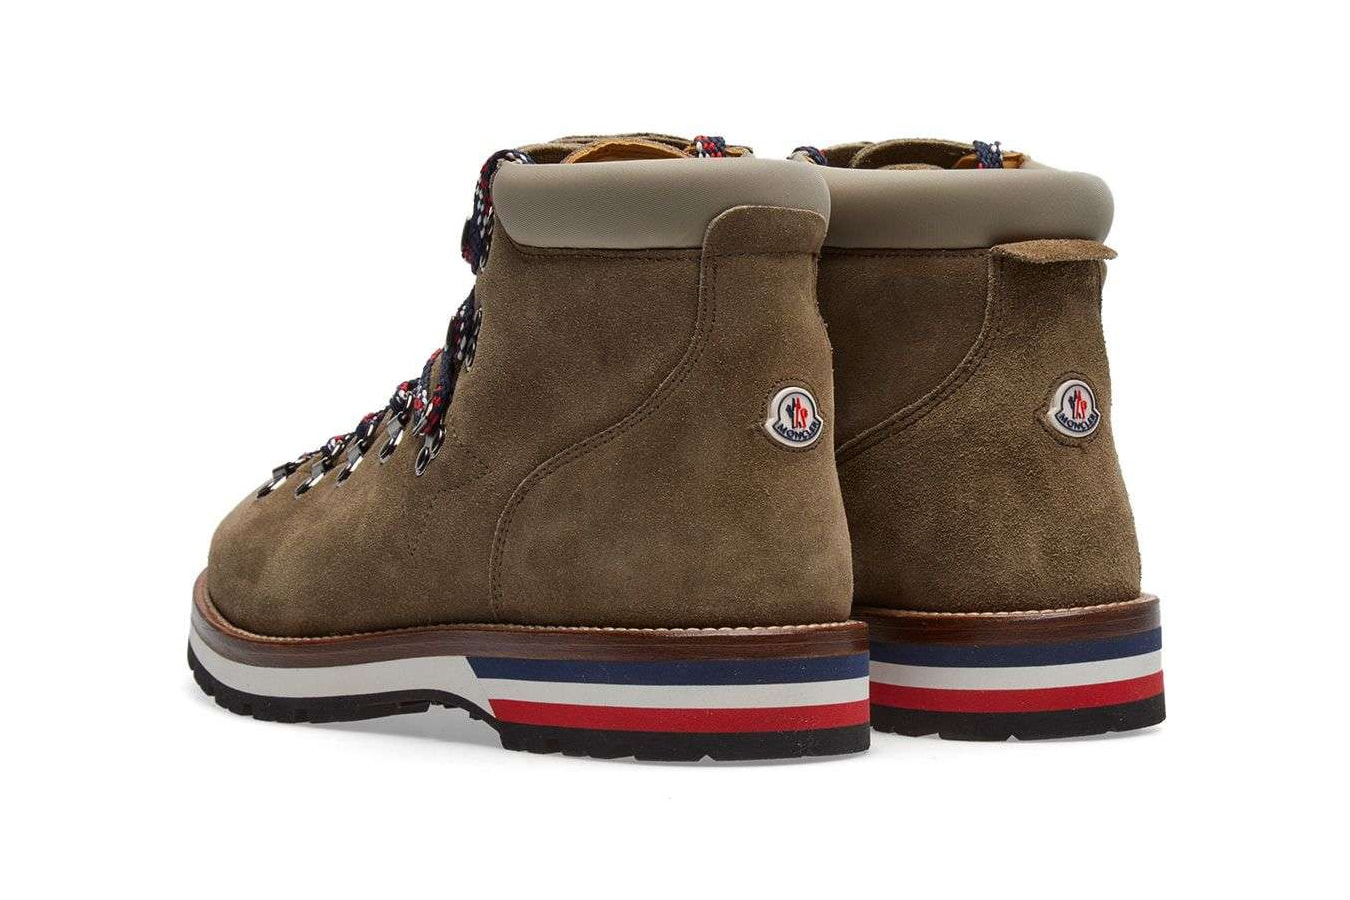 Moncler Fall Winter 2017 Peak Mountain Boot Sand Suede October Release Date Info Shoes Footwear END Clothing red white blue hiking